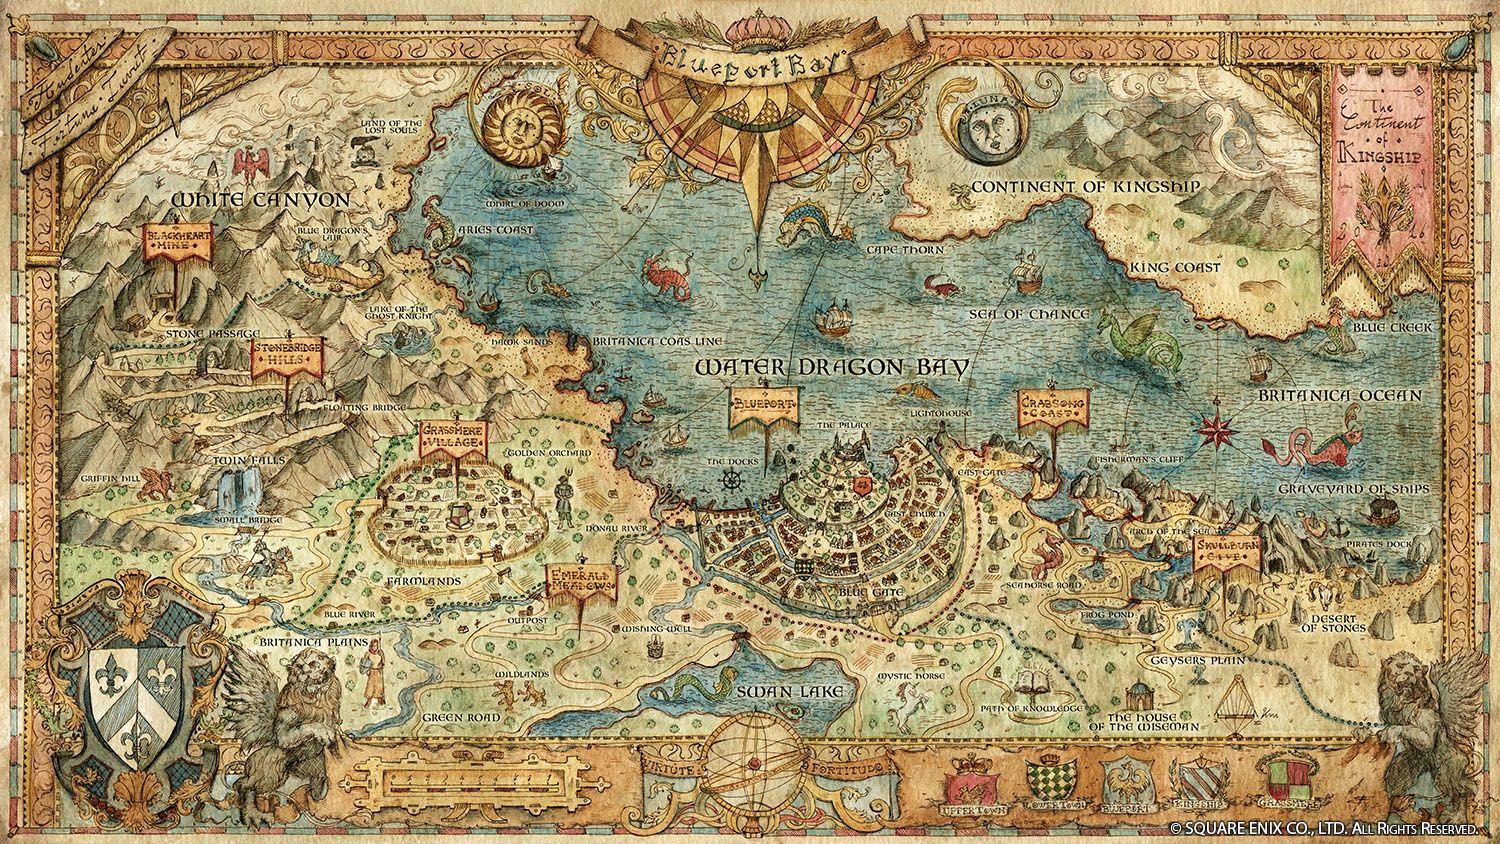 Project OCTOPATH TRAVELER version of map from trailer